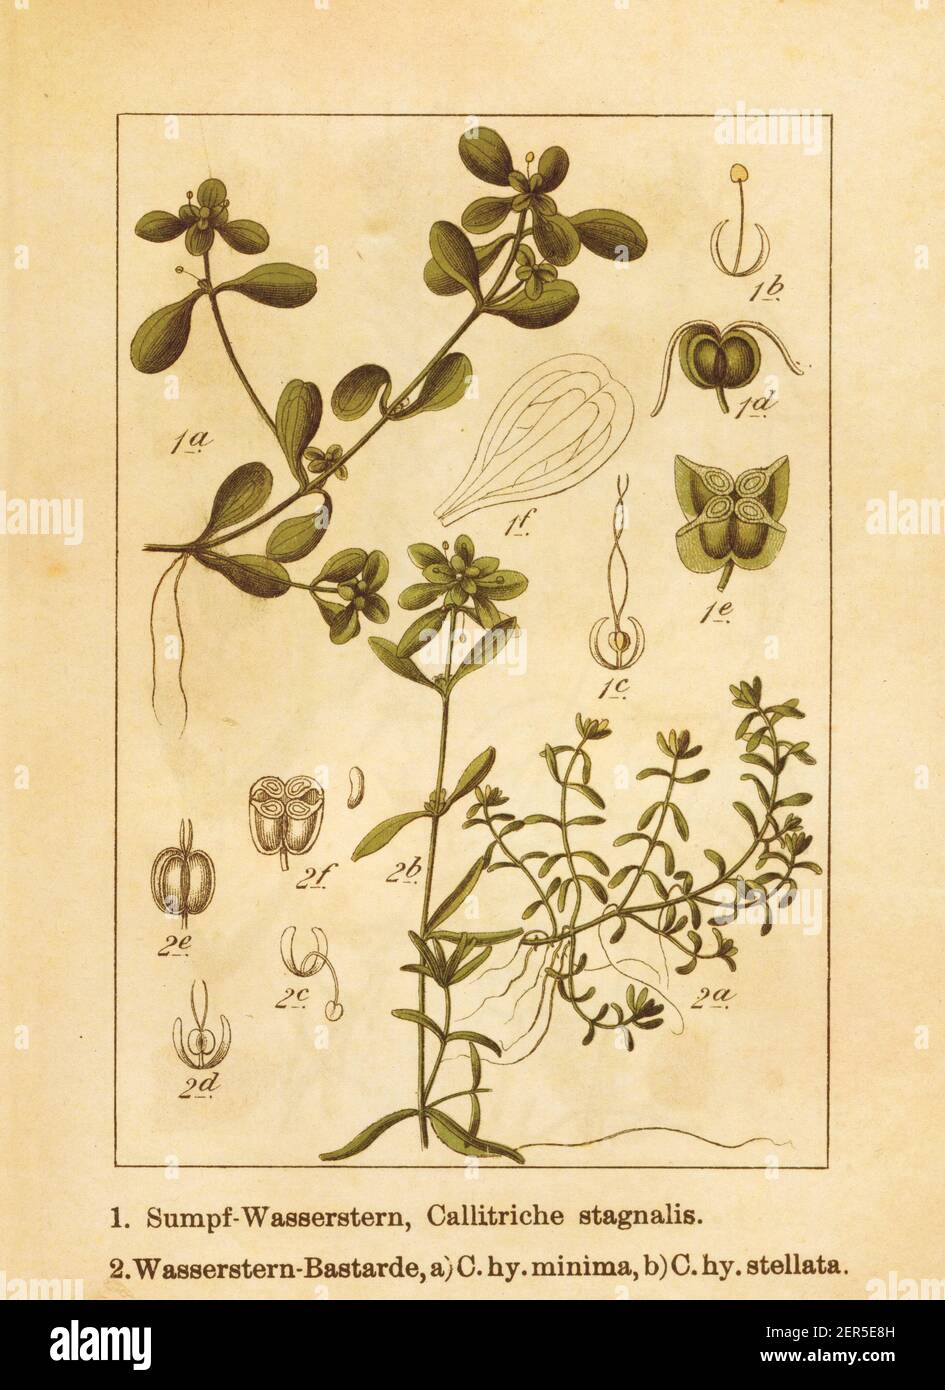 Antique illustration of a callitriche stagnalis (also known as pond water starwort) and callitriche palustris (also known as callitriche minima, calli Stock Photo